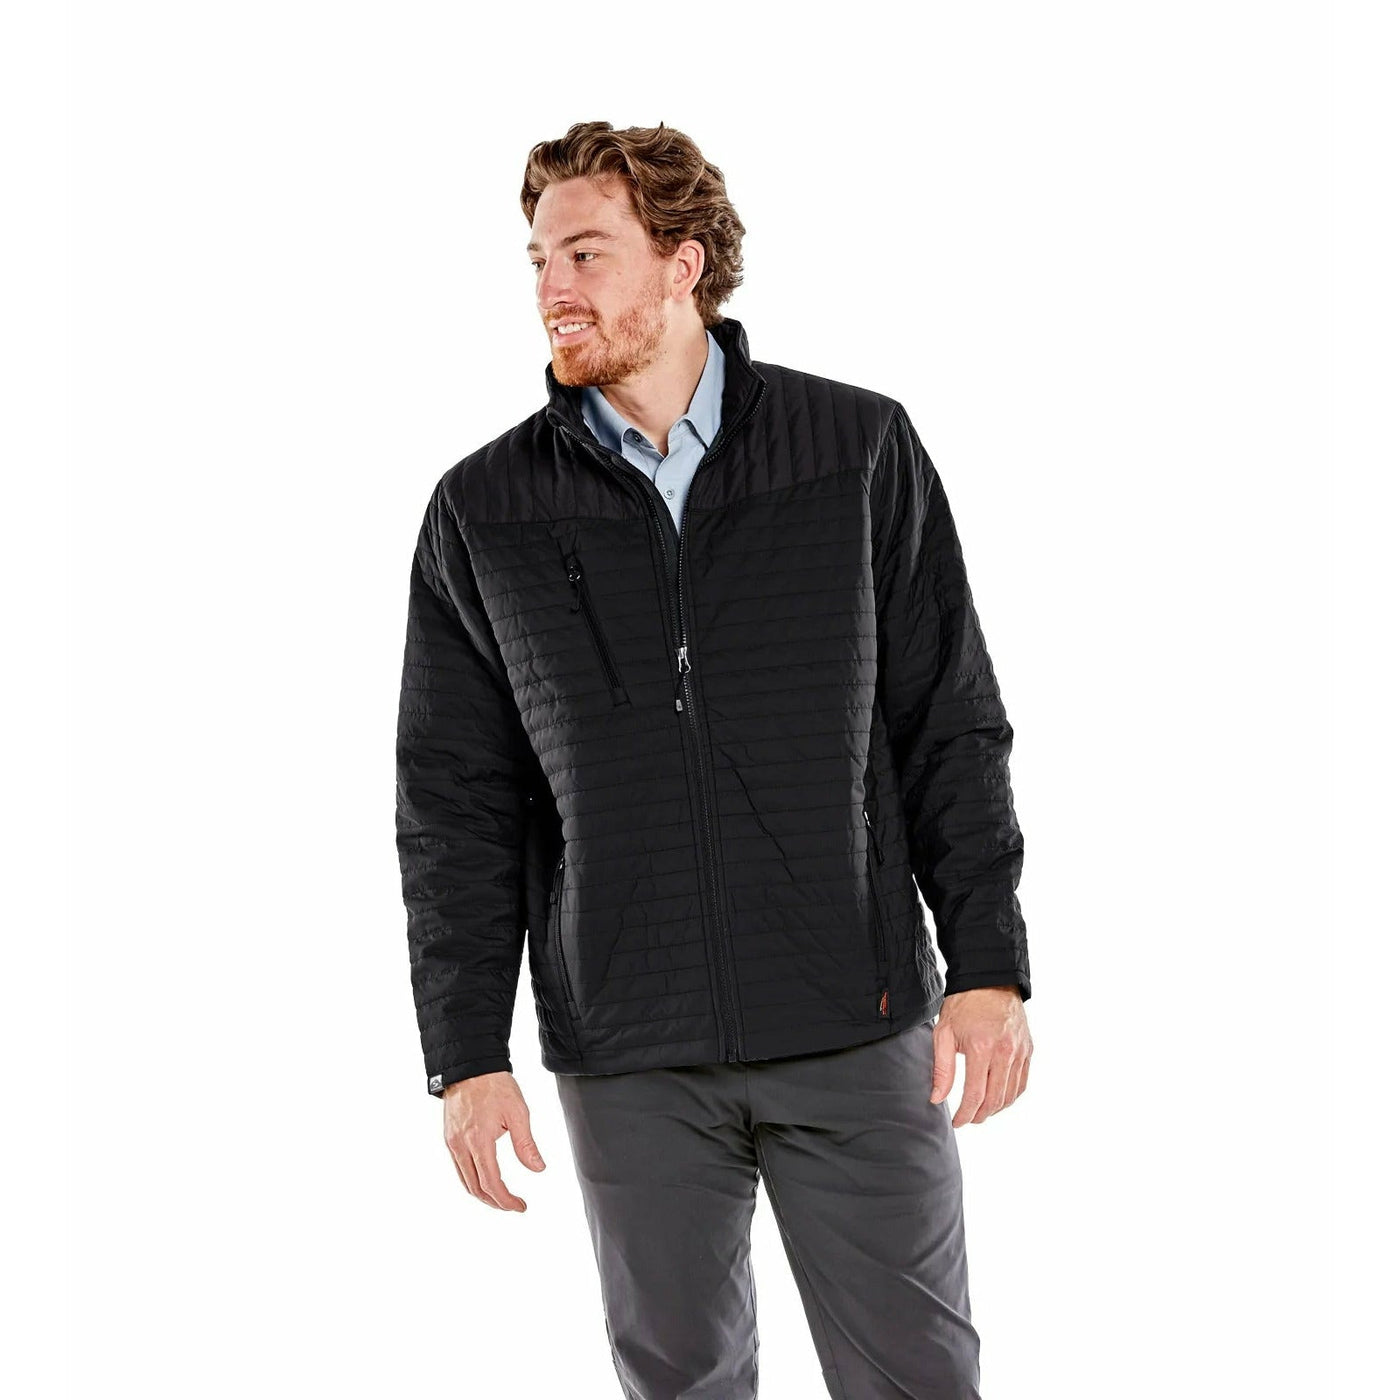 The Front Runner Jacket